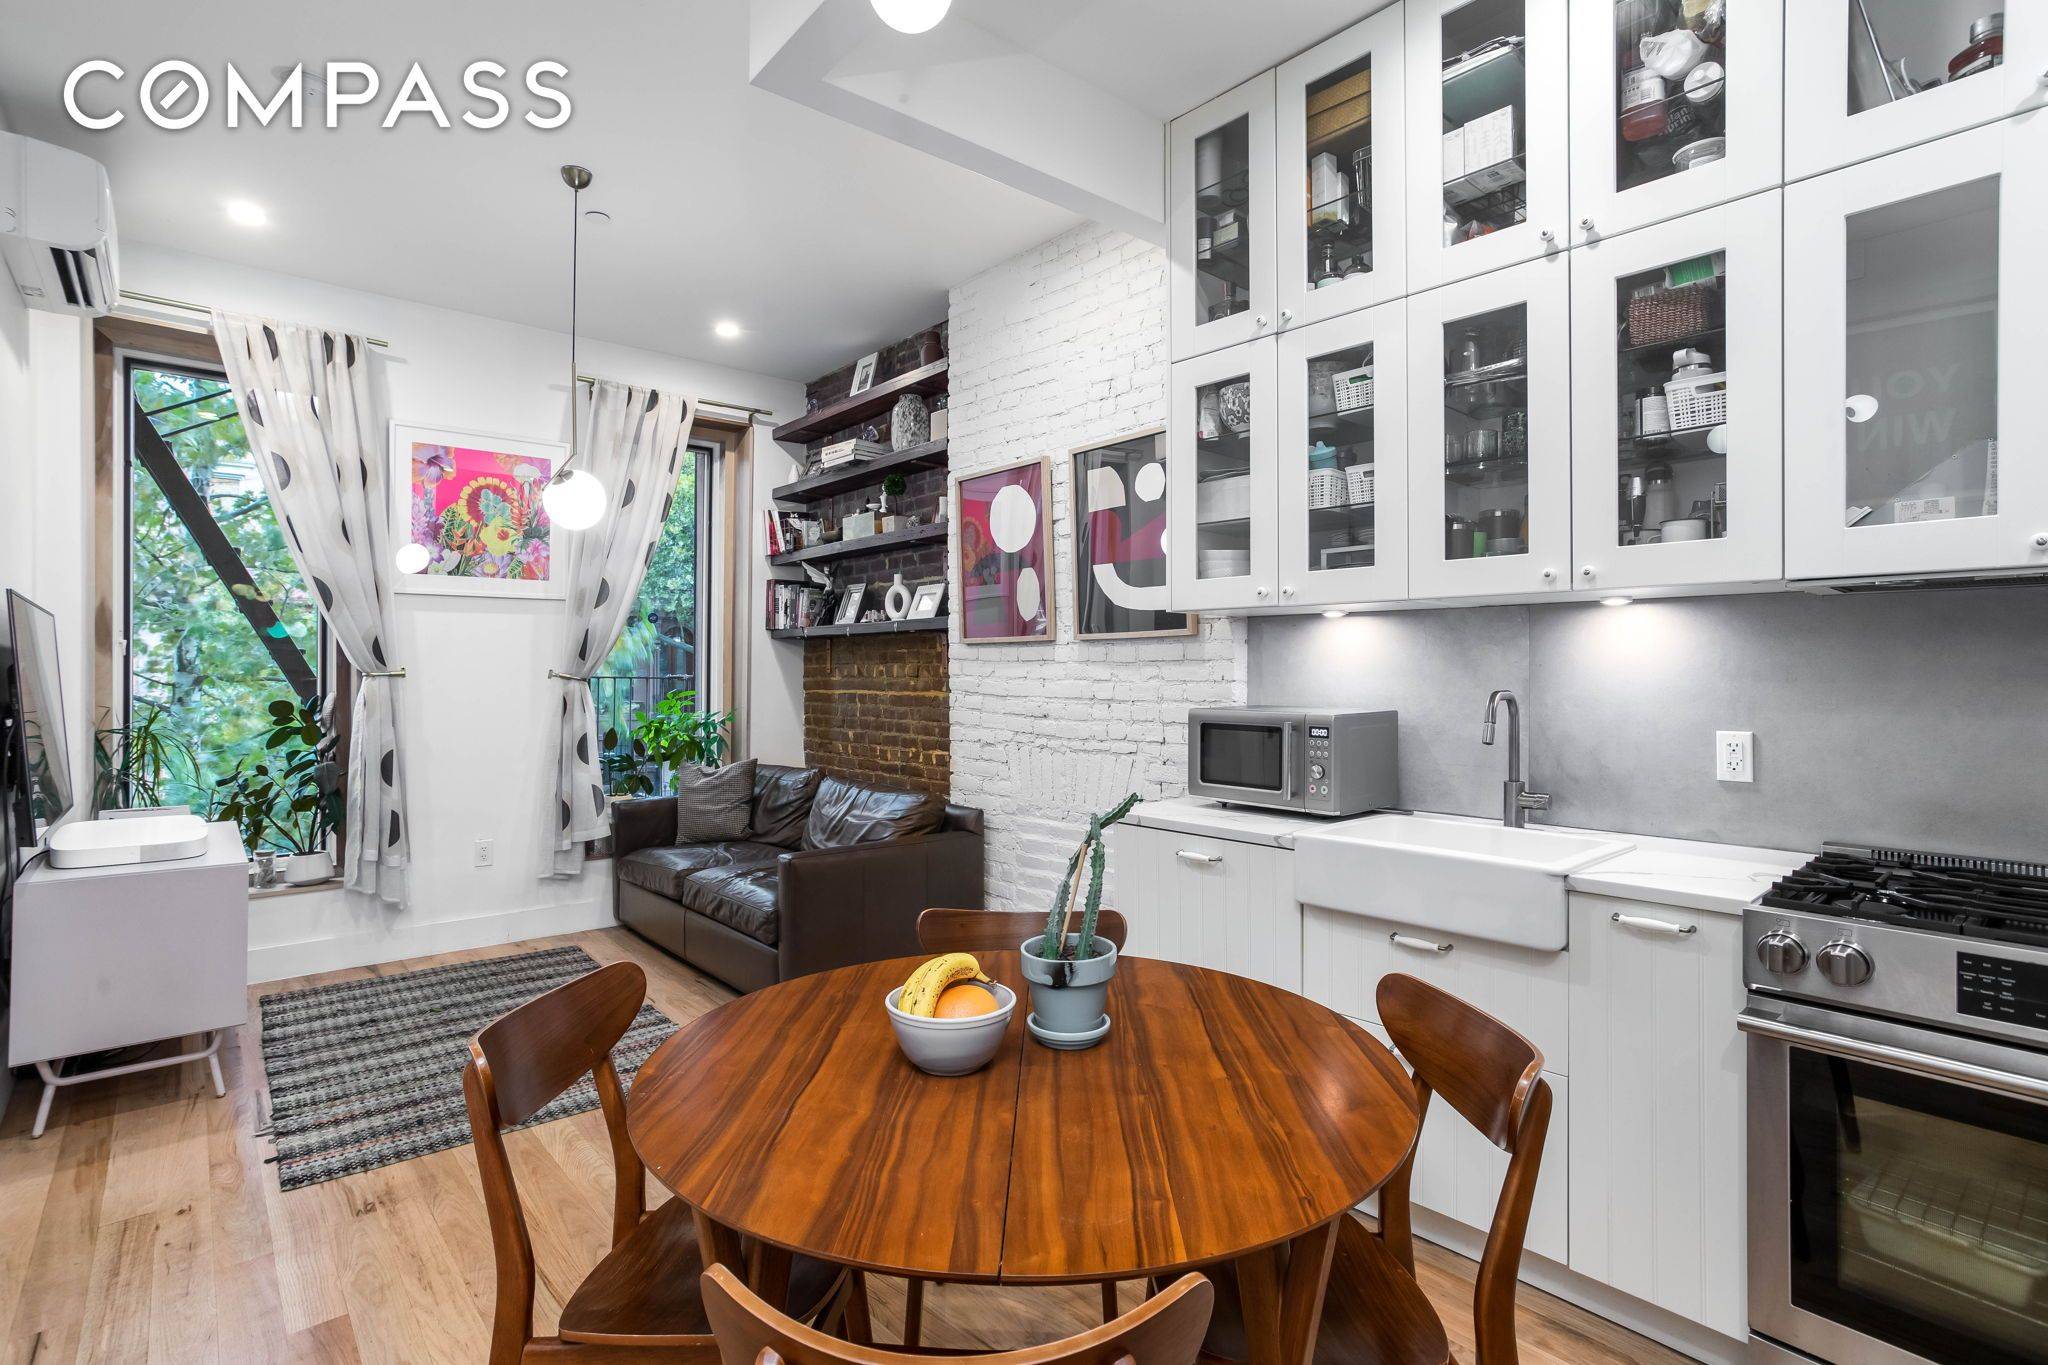 A sleek and sexy two bedroom parlor level townhouse condo in the heart of bustling Bedford Stuyvesant.